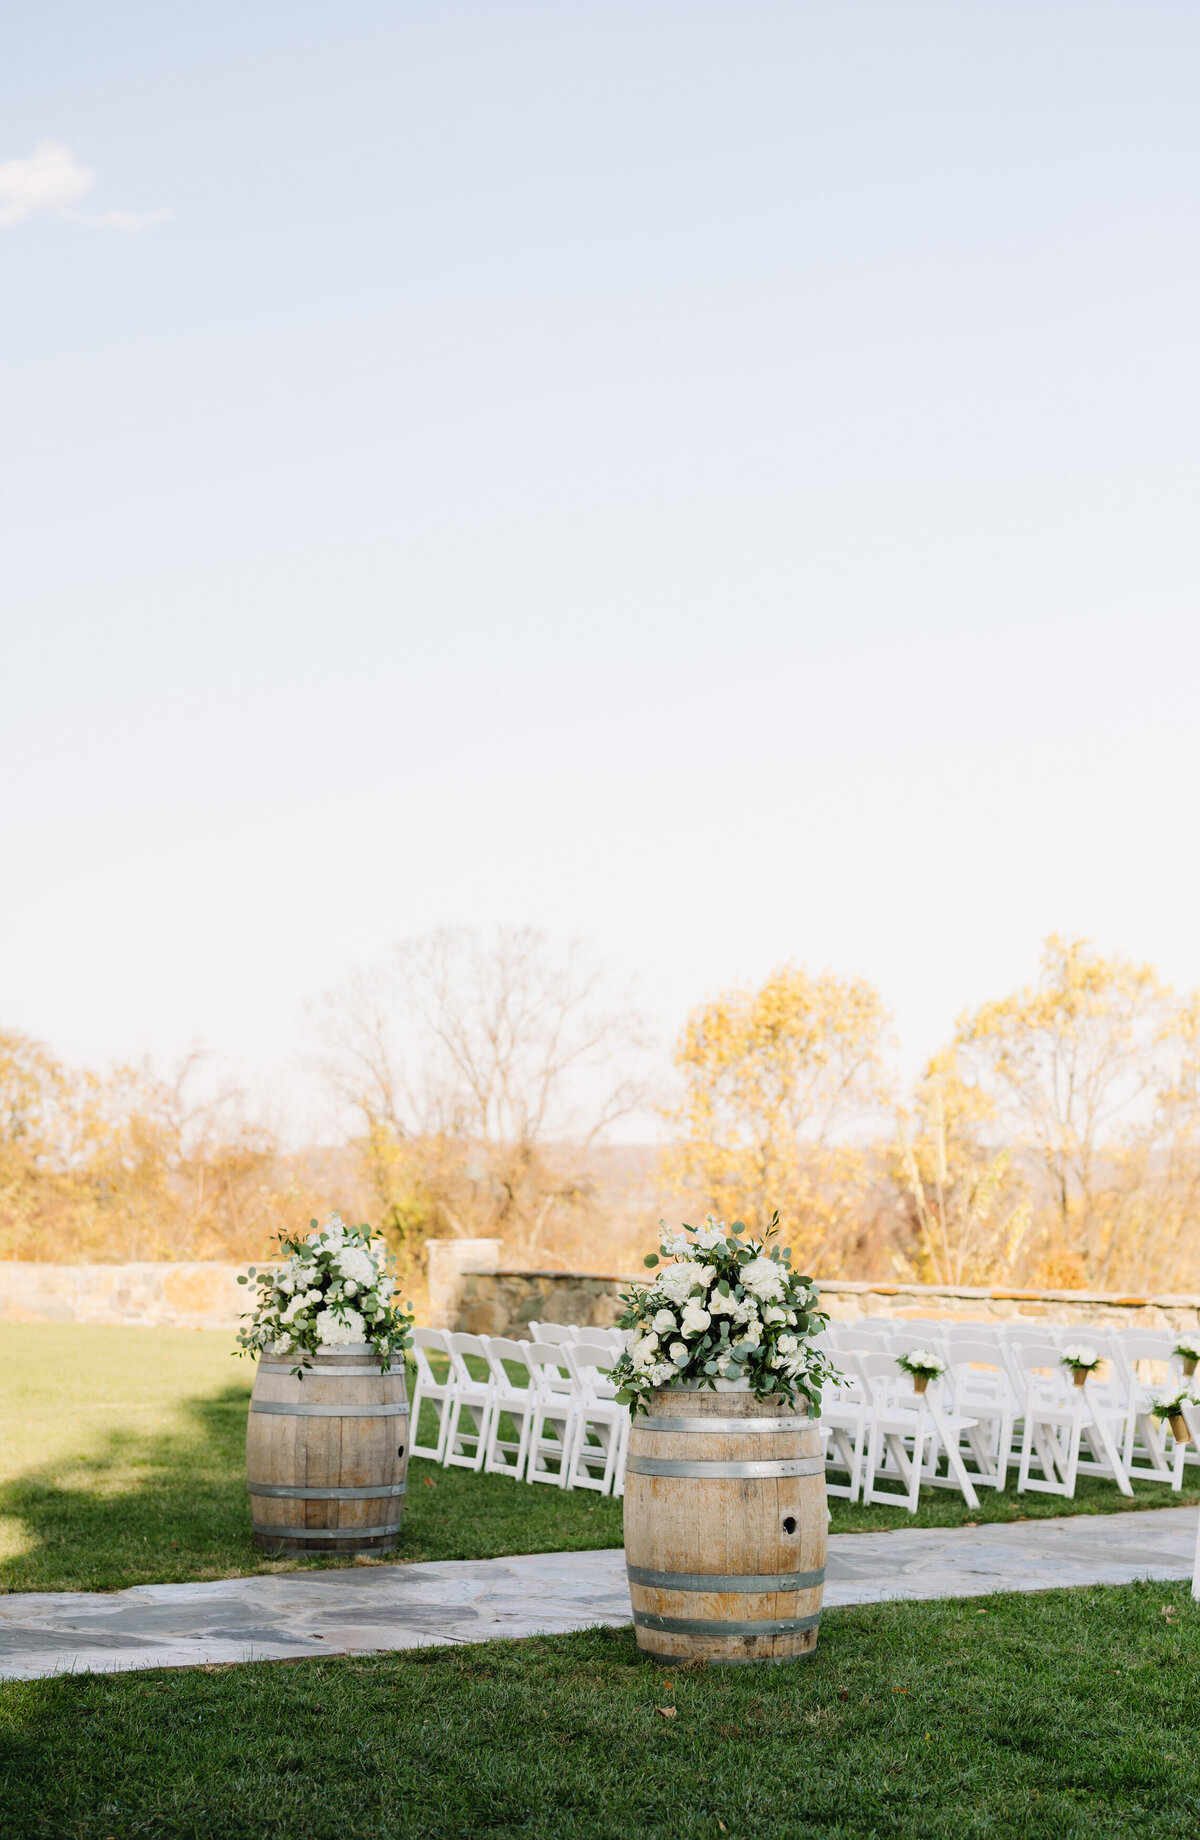 outdoor ceremony decor at Charlottesville wedding venues outdoor ceremony space with white chairs, white roses and treeline in the distance